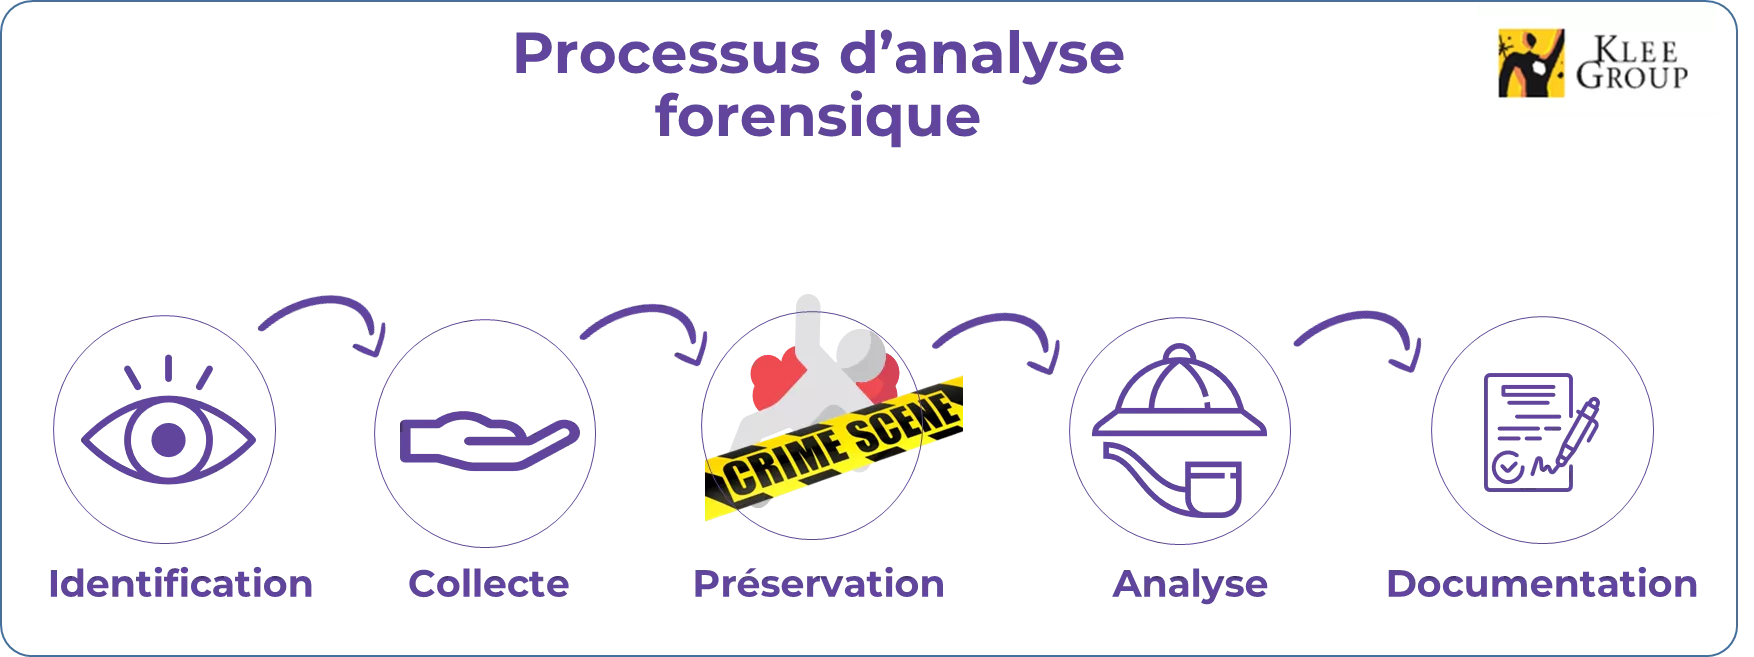 Processus d'analyse forensique 